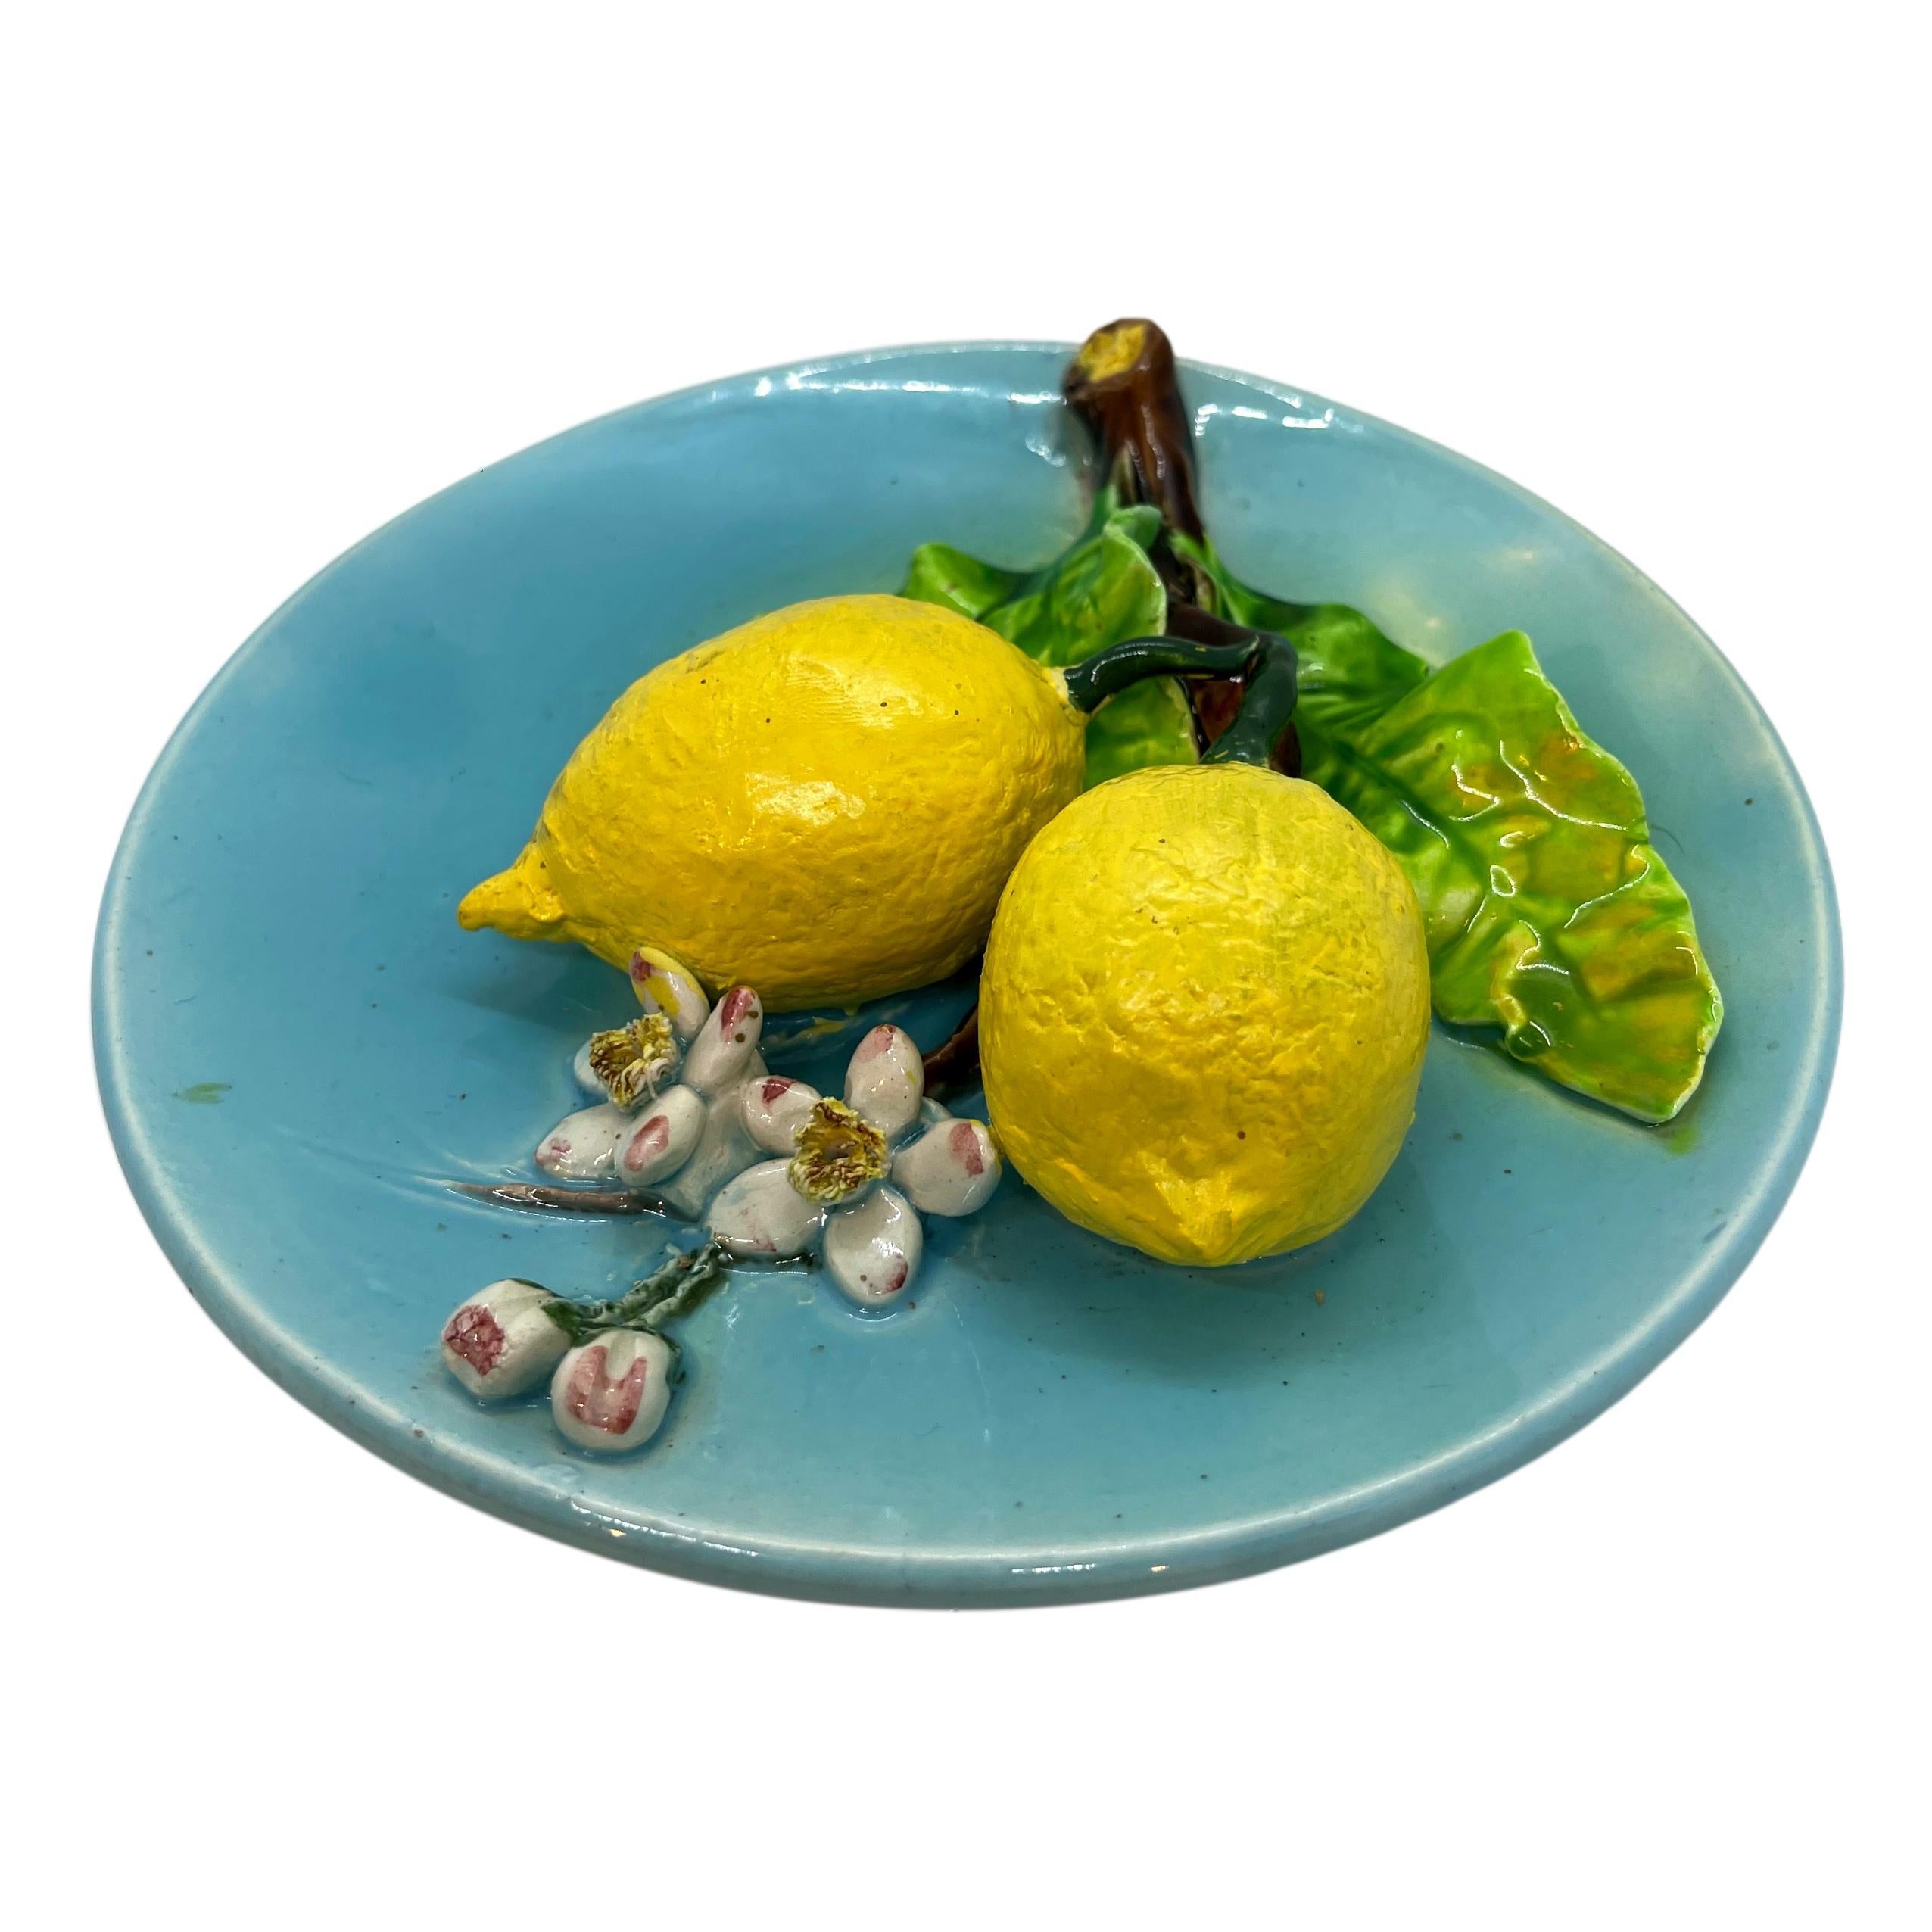 Molded French Majolica Trompe L'oeil Wall Plaque with Lemons, Perret-Gentil, Menton For Sale